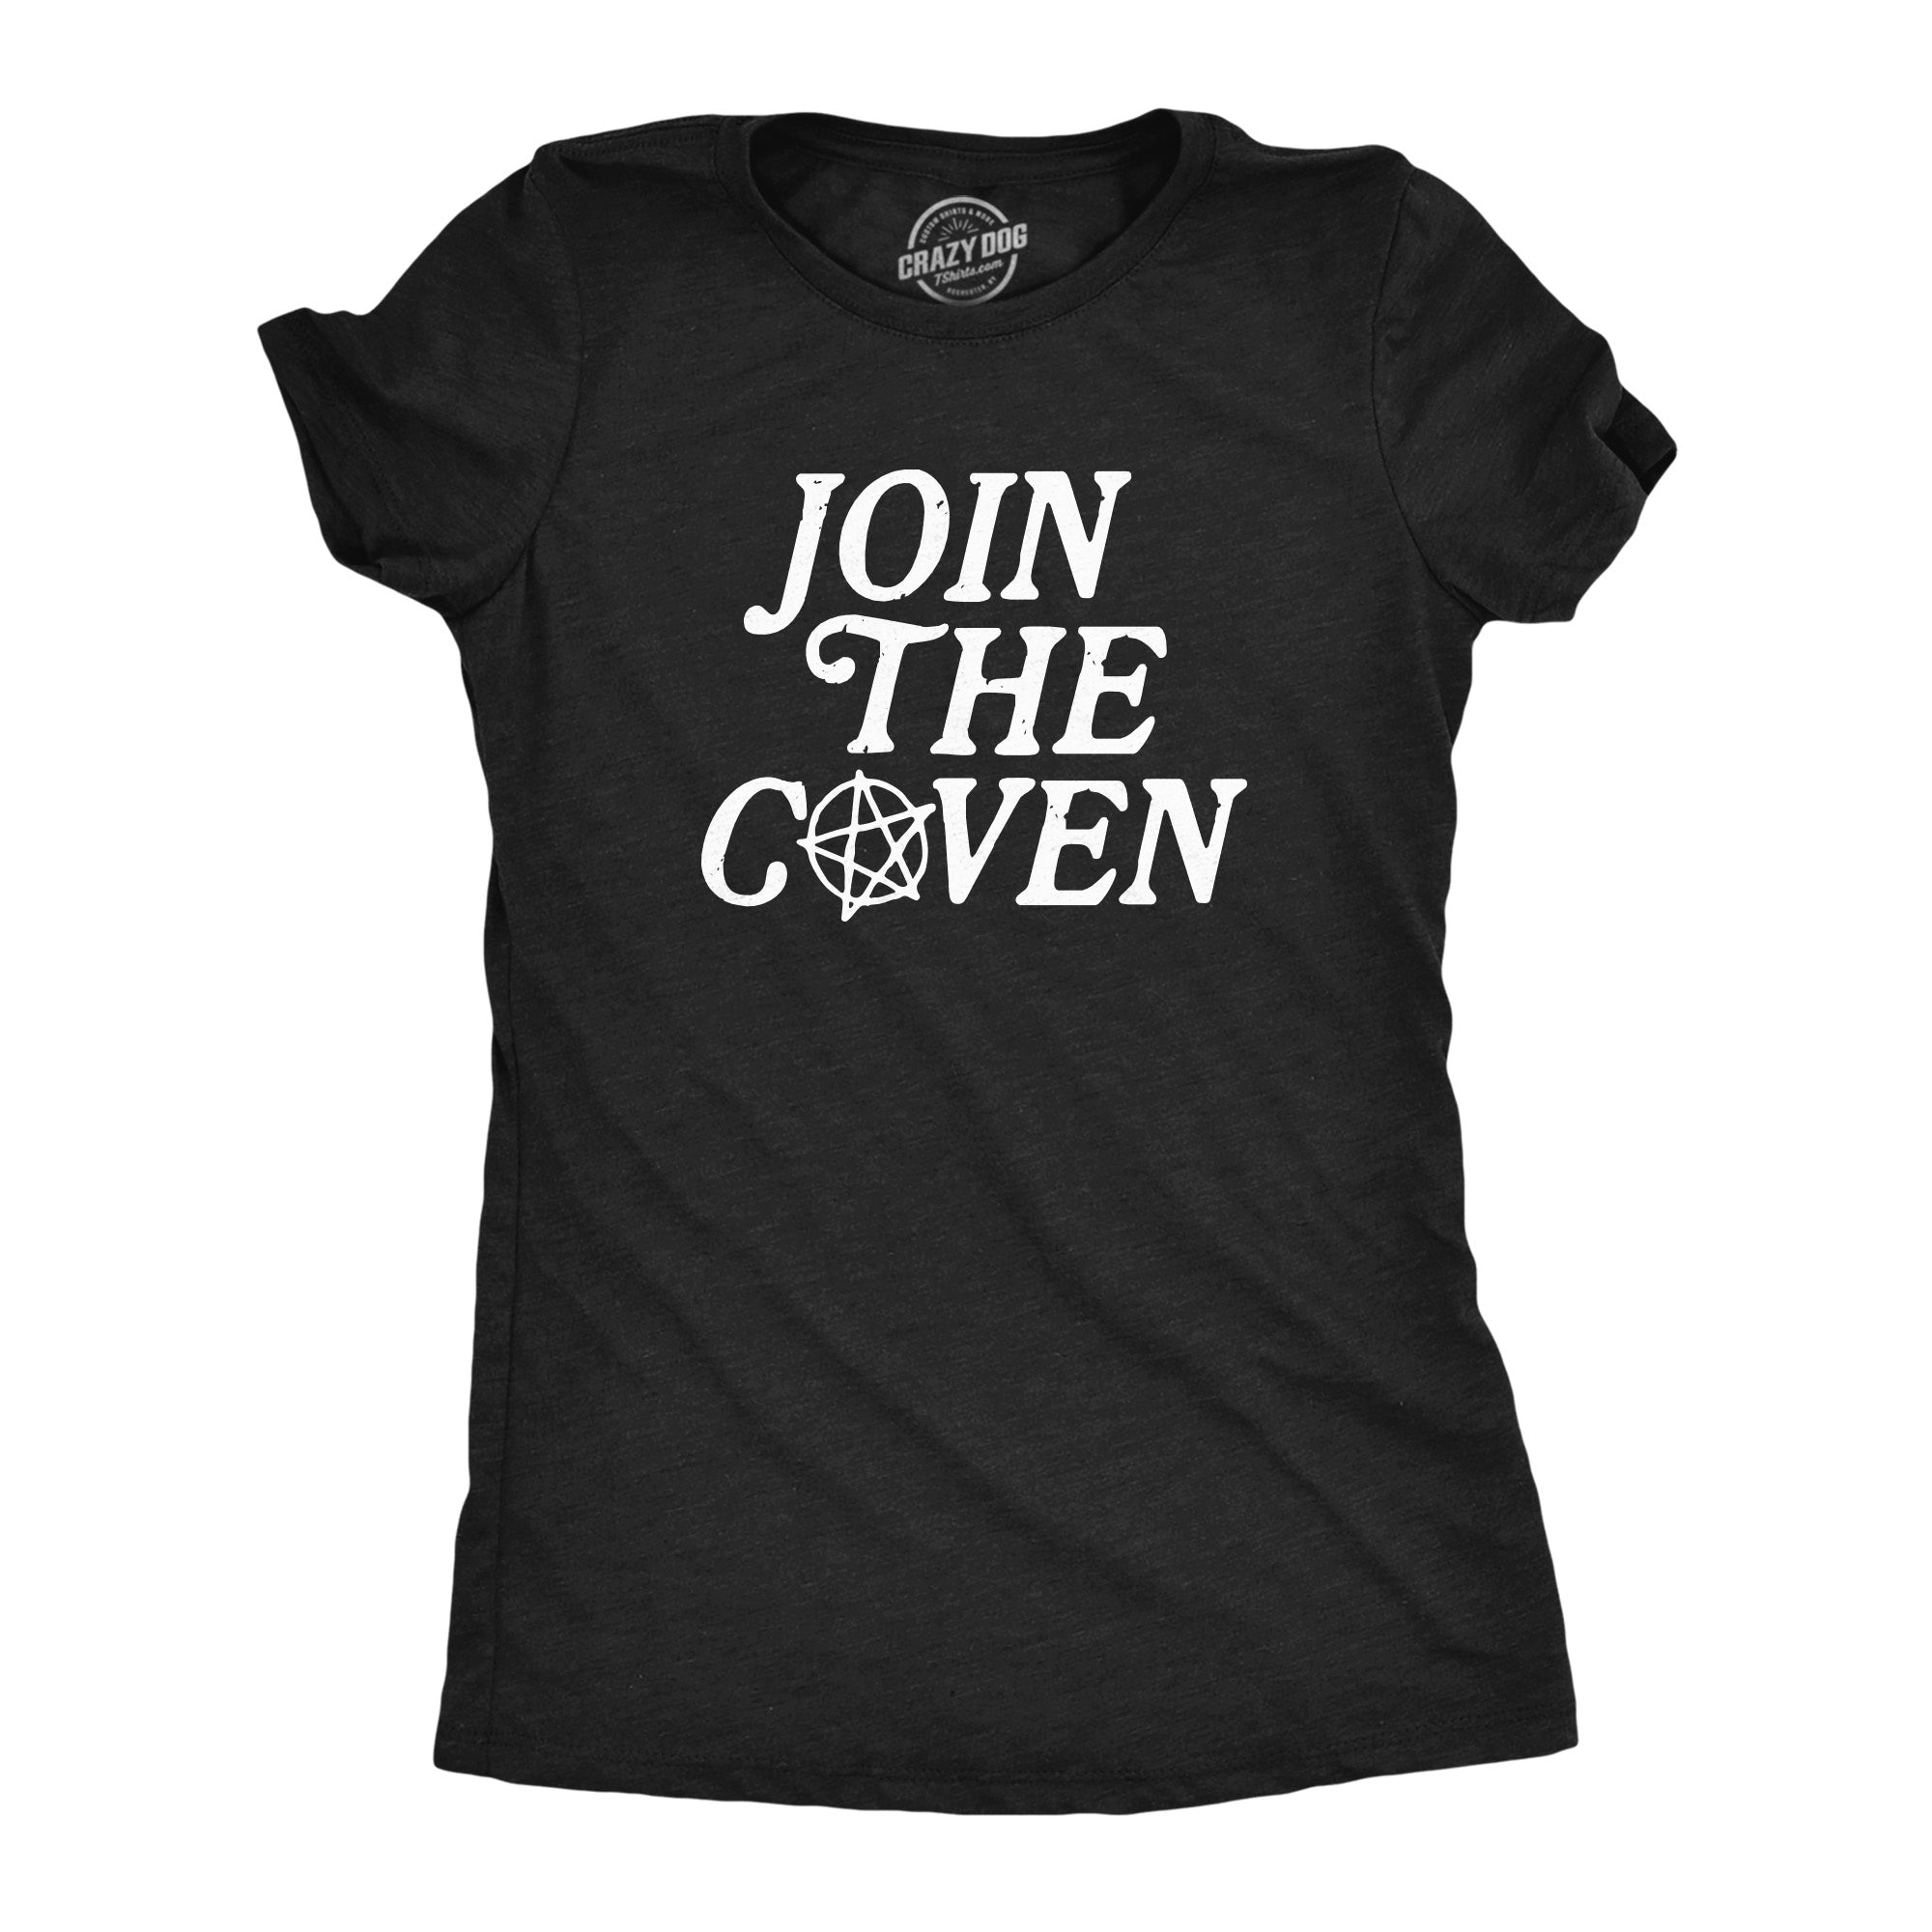 Funny Heather Black - COVEN Join The Coven Womens T Shirt Nerdy Halloween Tee